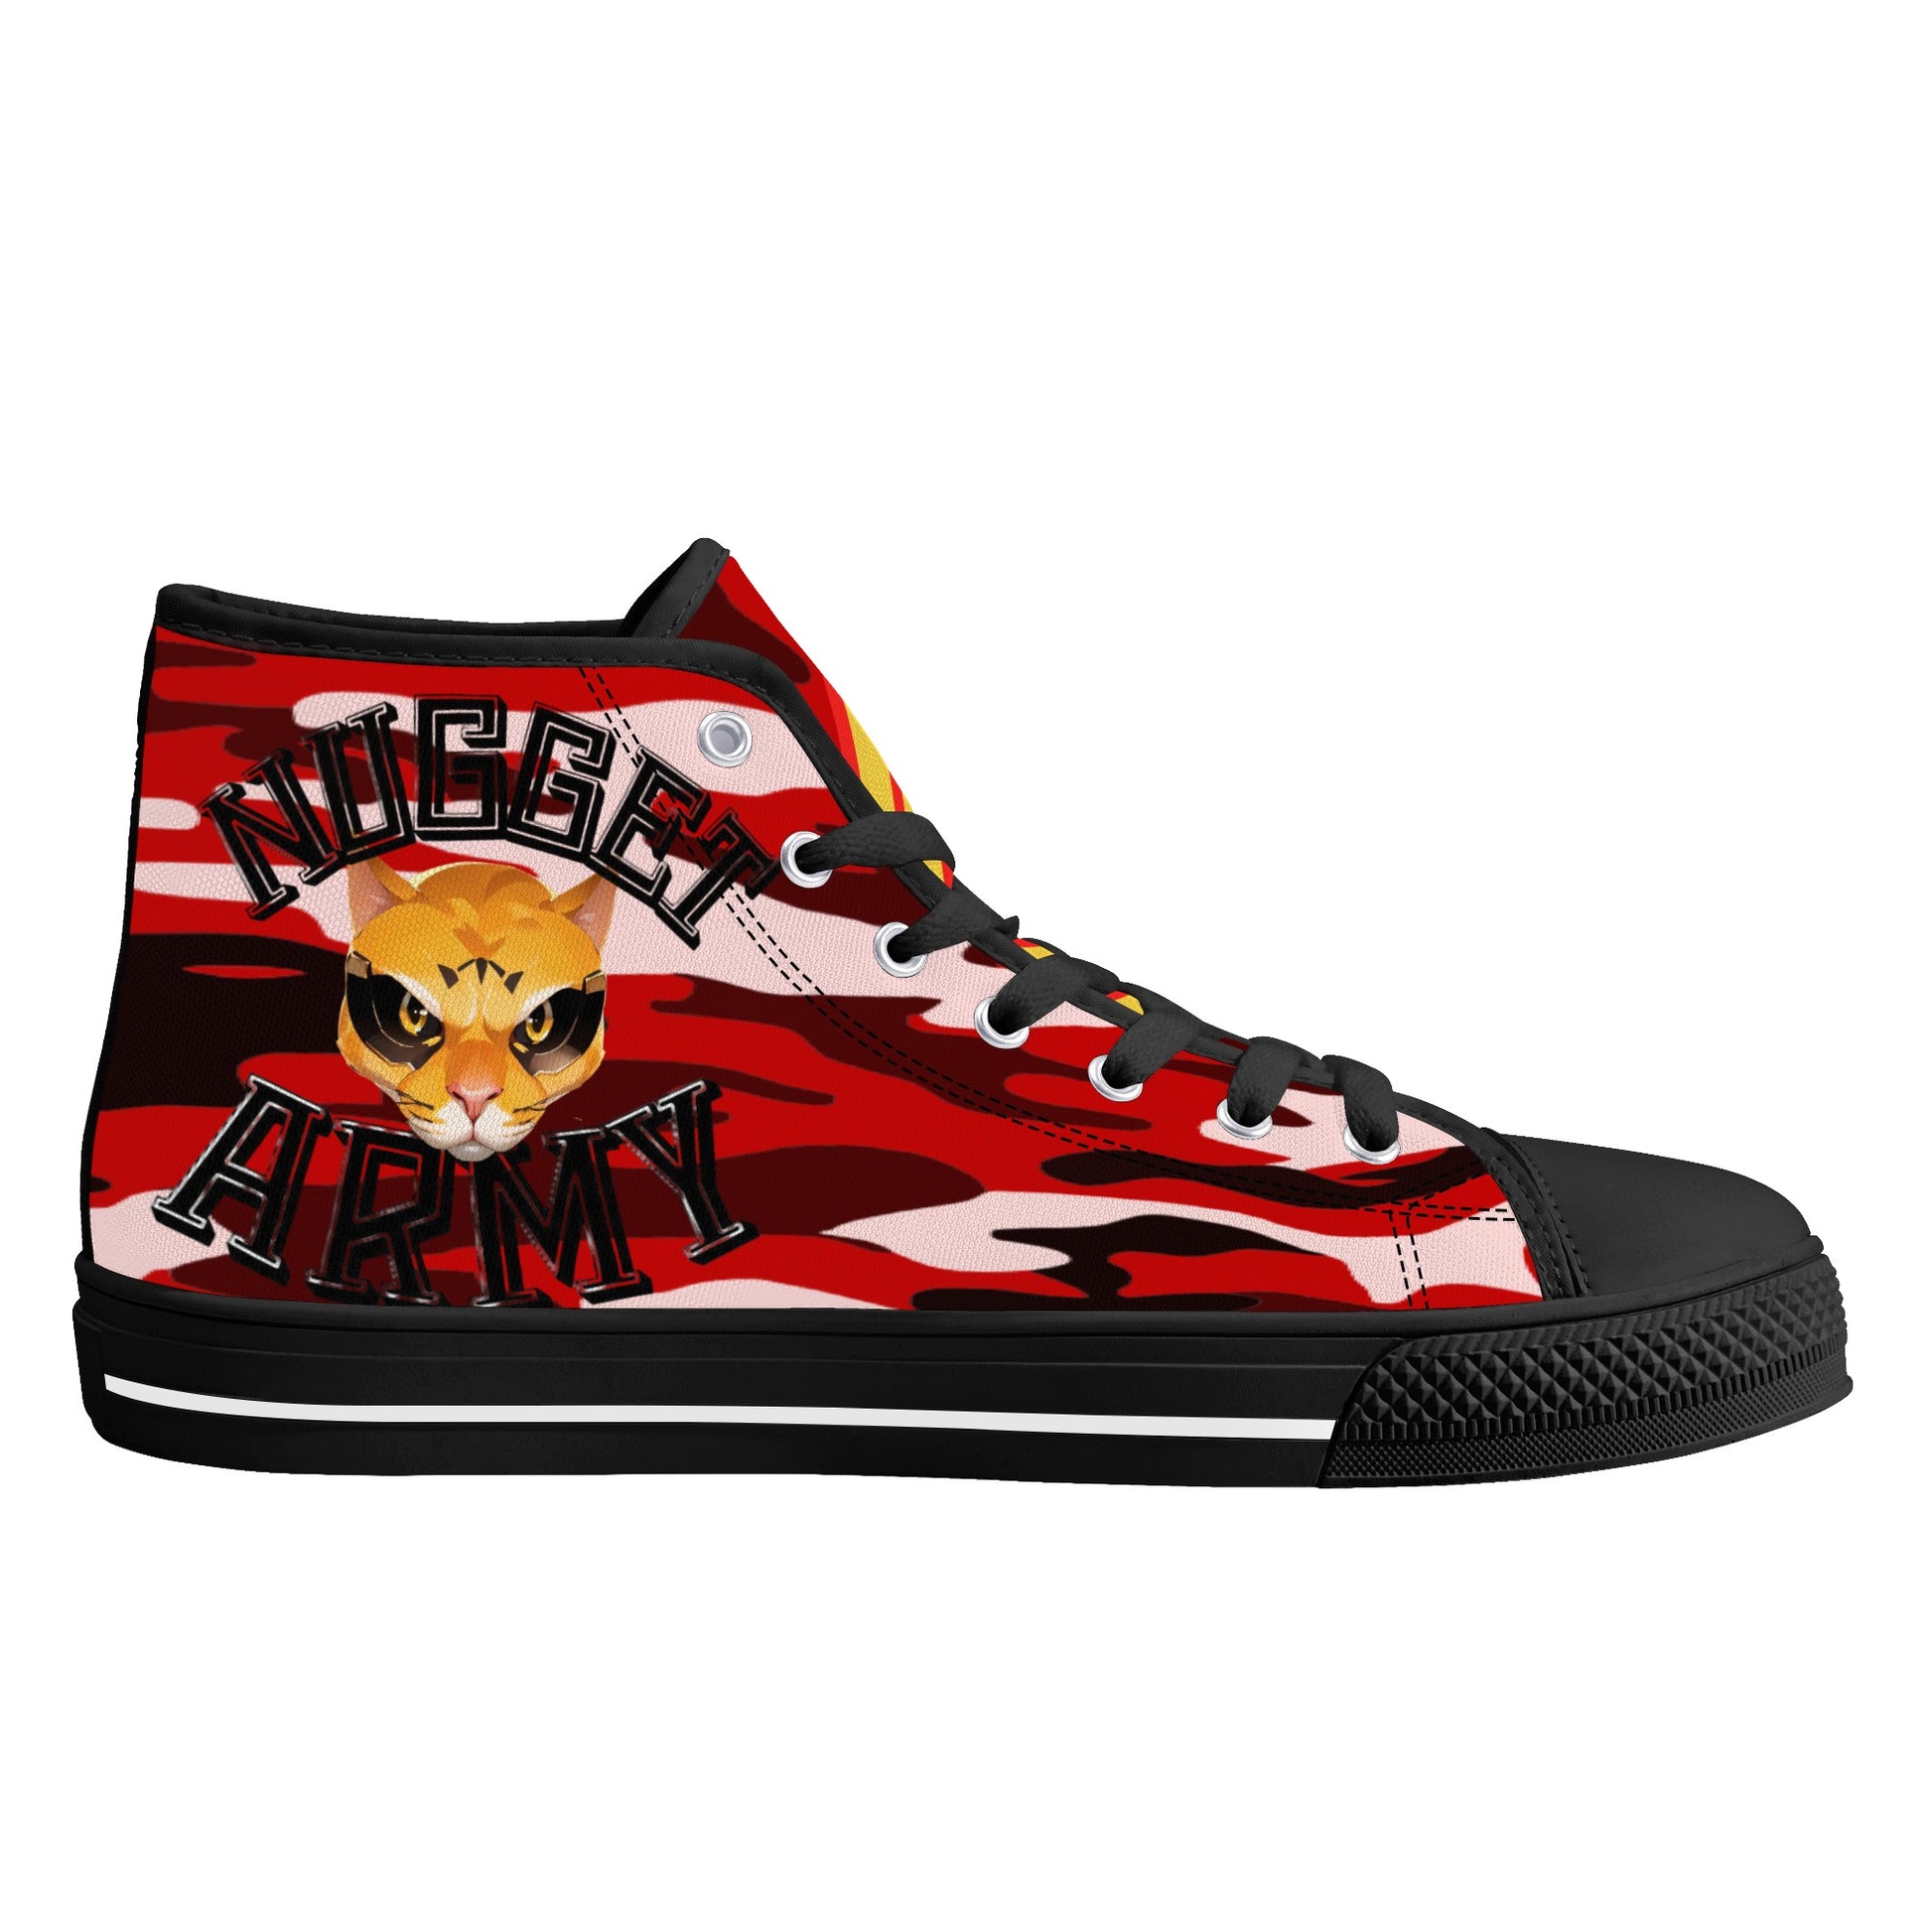 Stand out  with the  Nugget Army Mens High Top Canvas Shoes  available at Hey Nugget. Grab yours today!